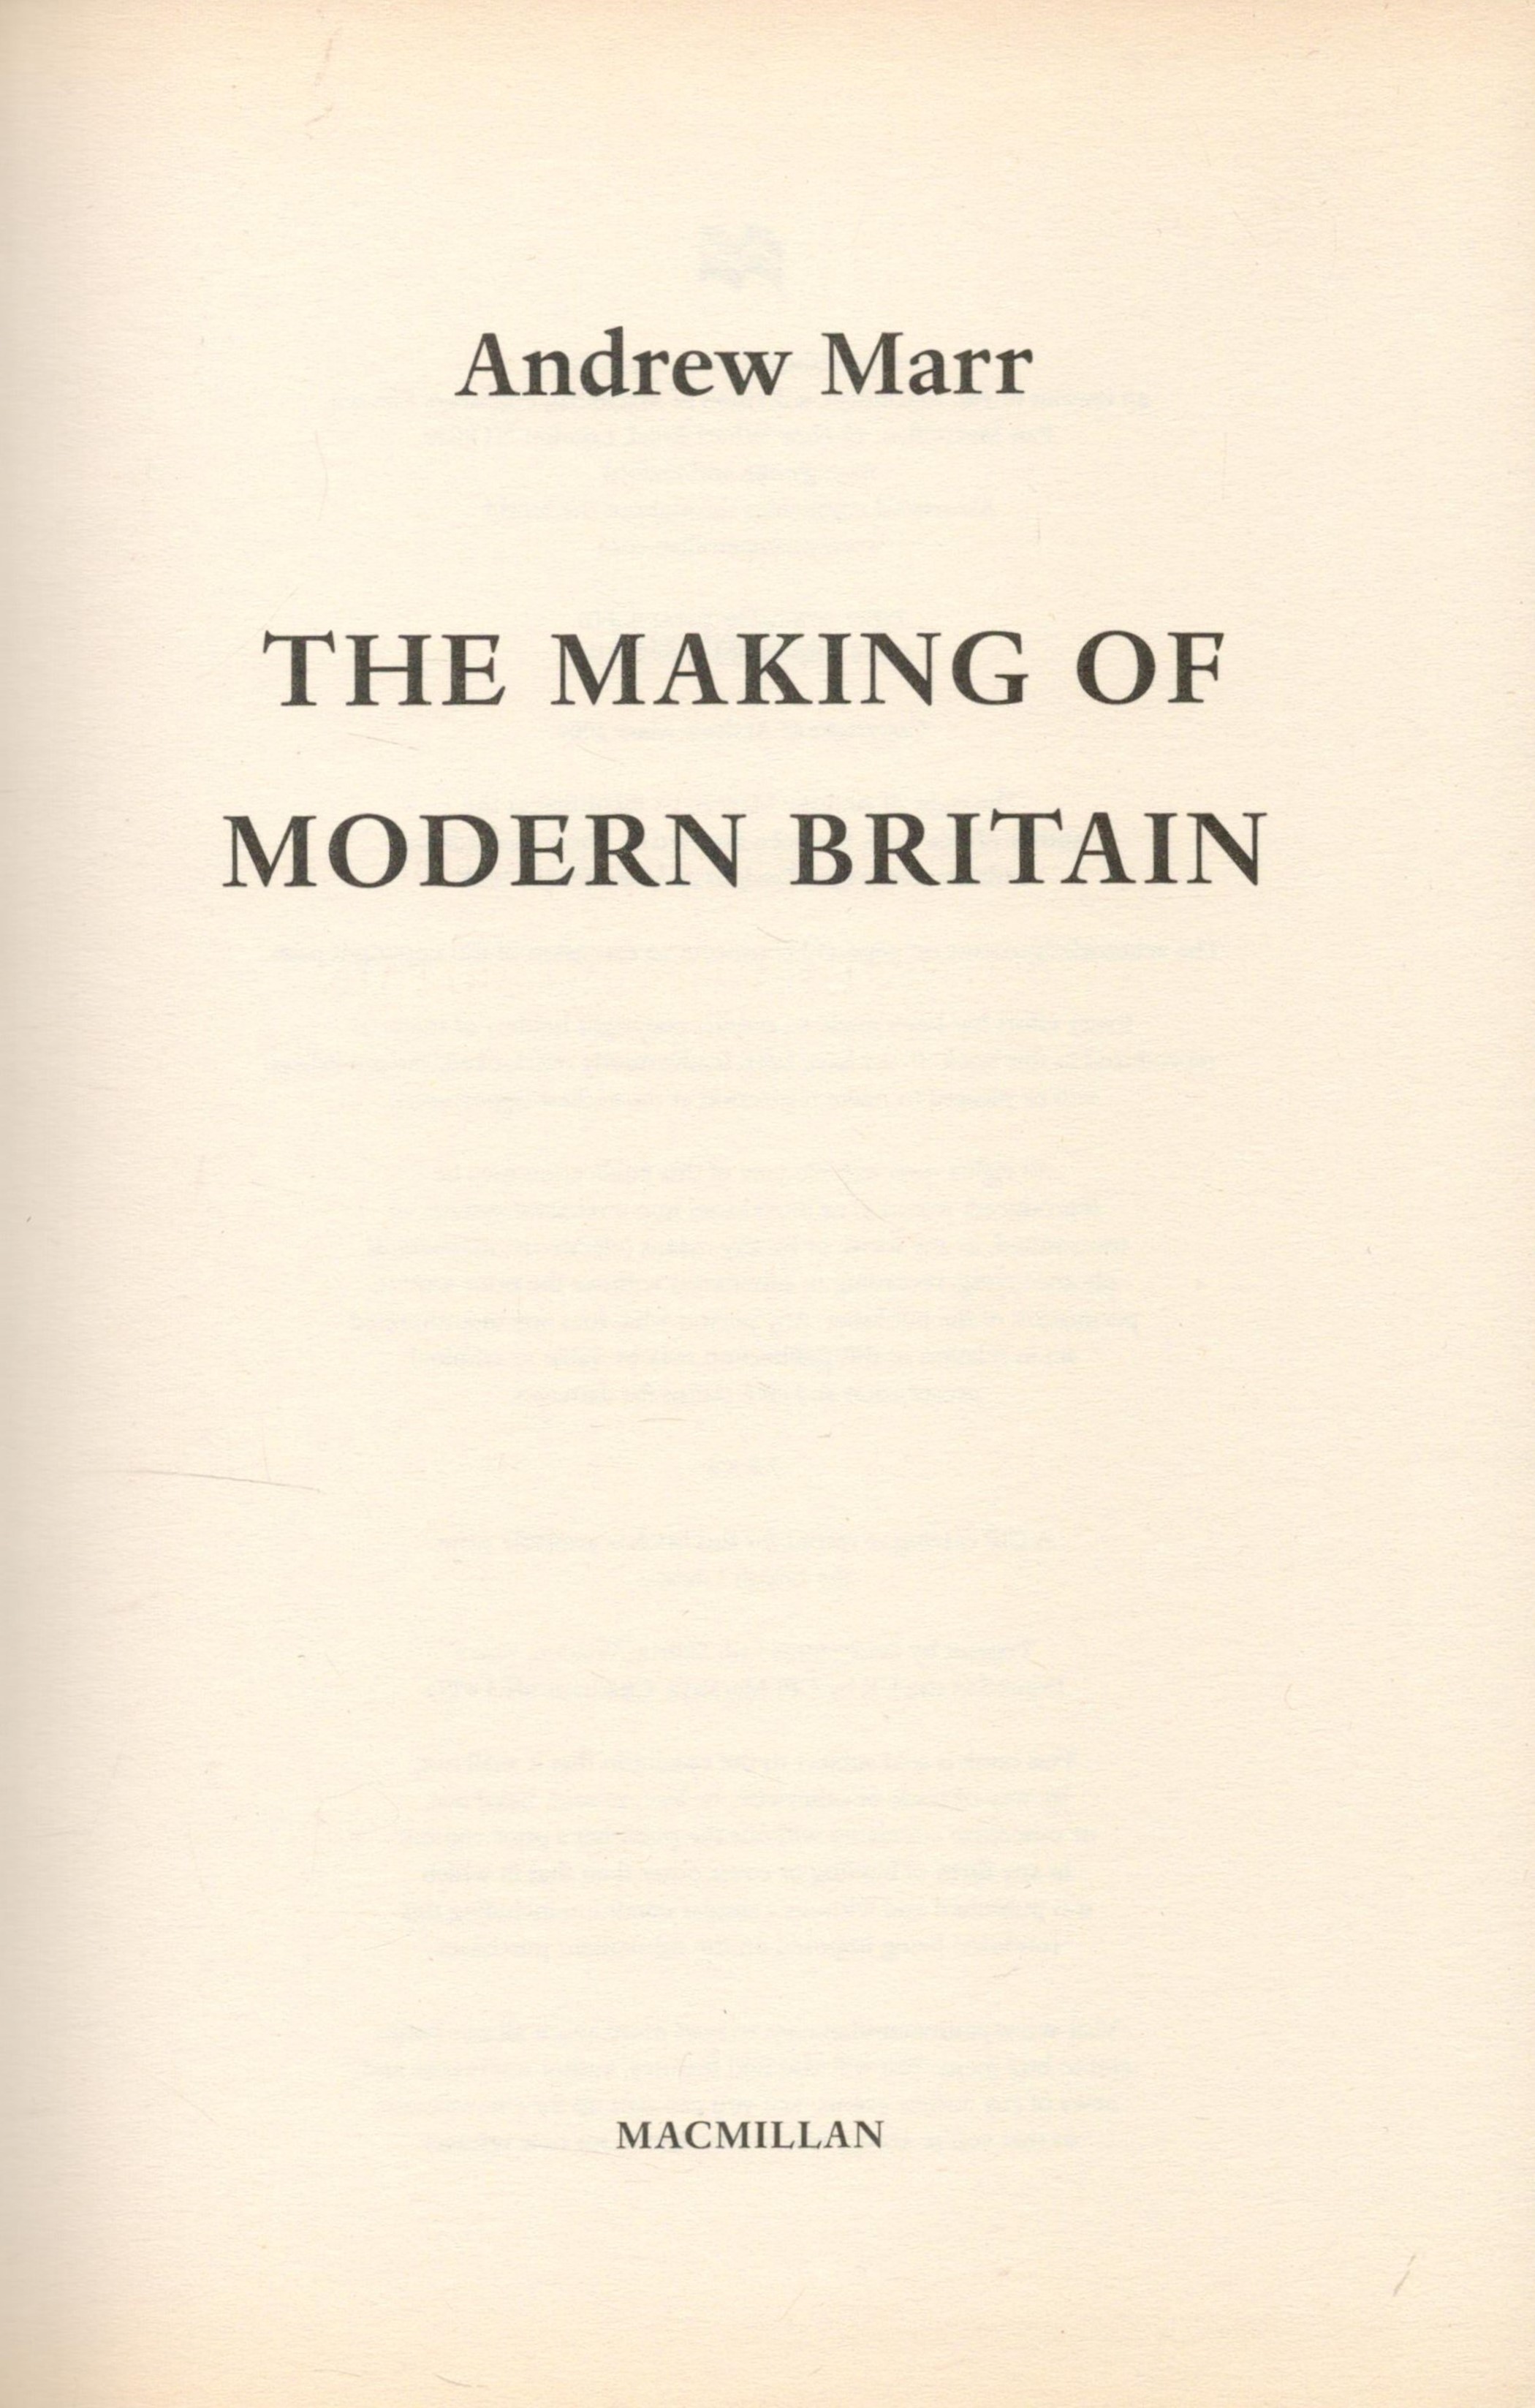 The Making Of Modern Britain by Andrew Marr 2009 First Edition Hardback Book with 451 pages - Image 2 of 3